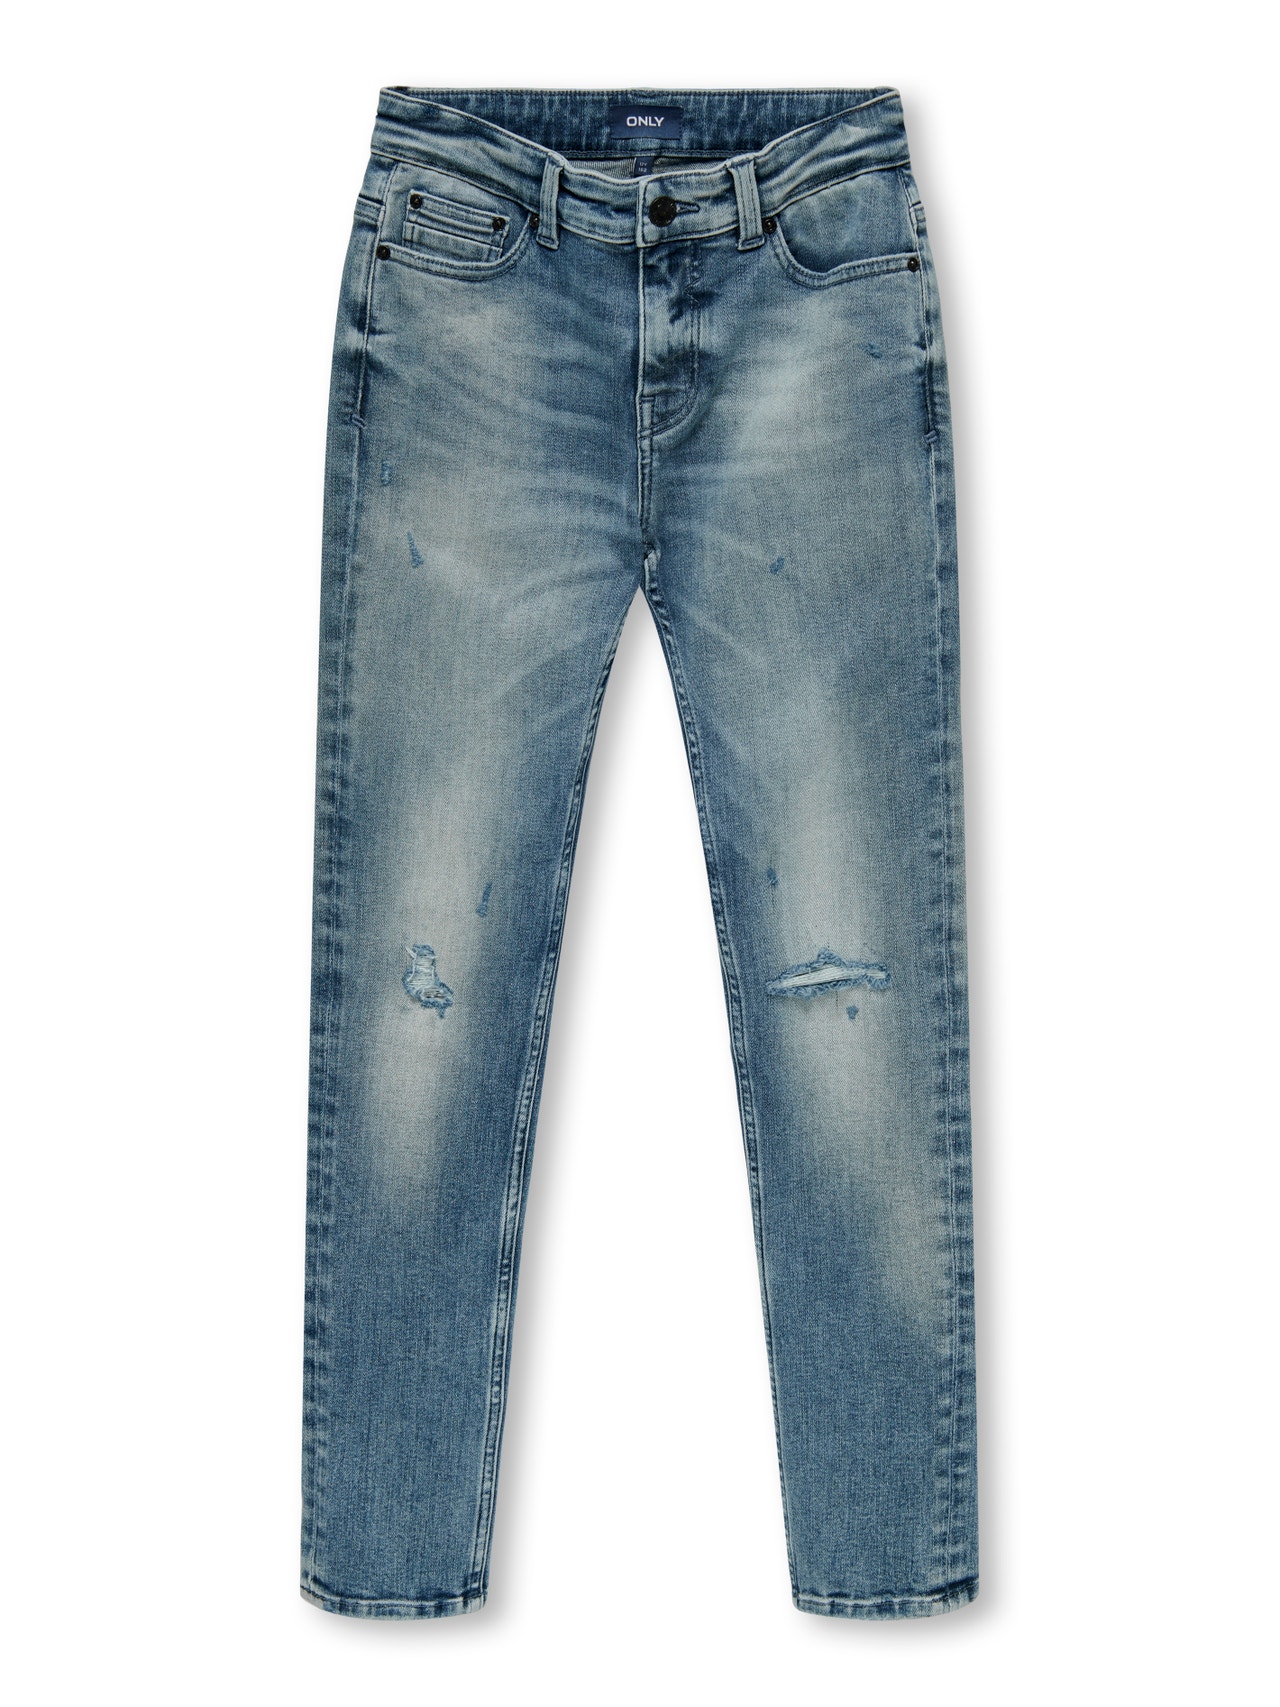 ONLY Jeans Slim Tapered Fit -Special Bright Blue Denim - 15317578